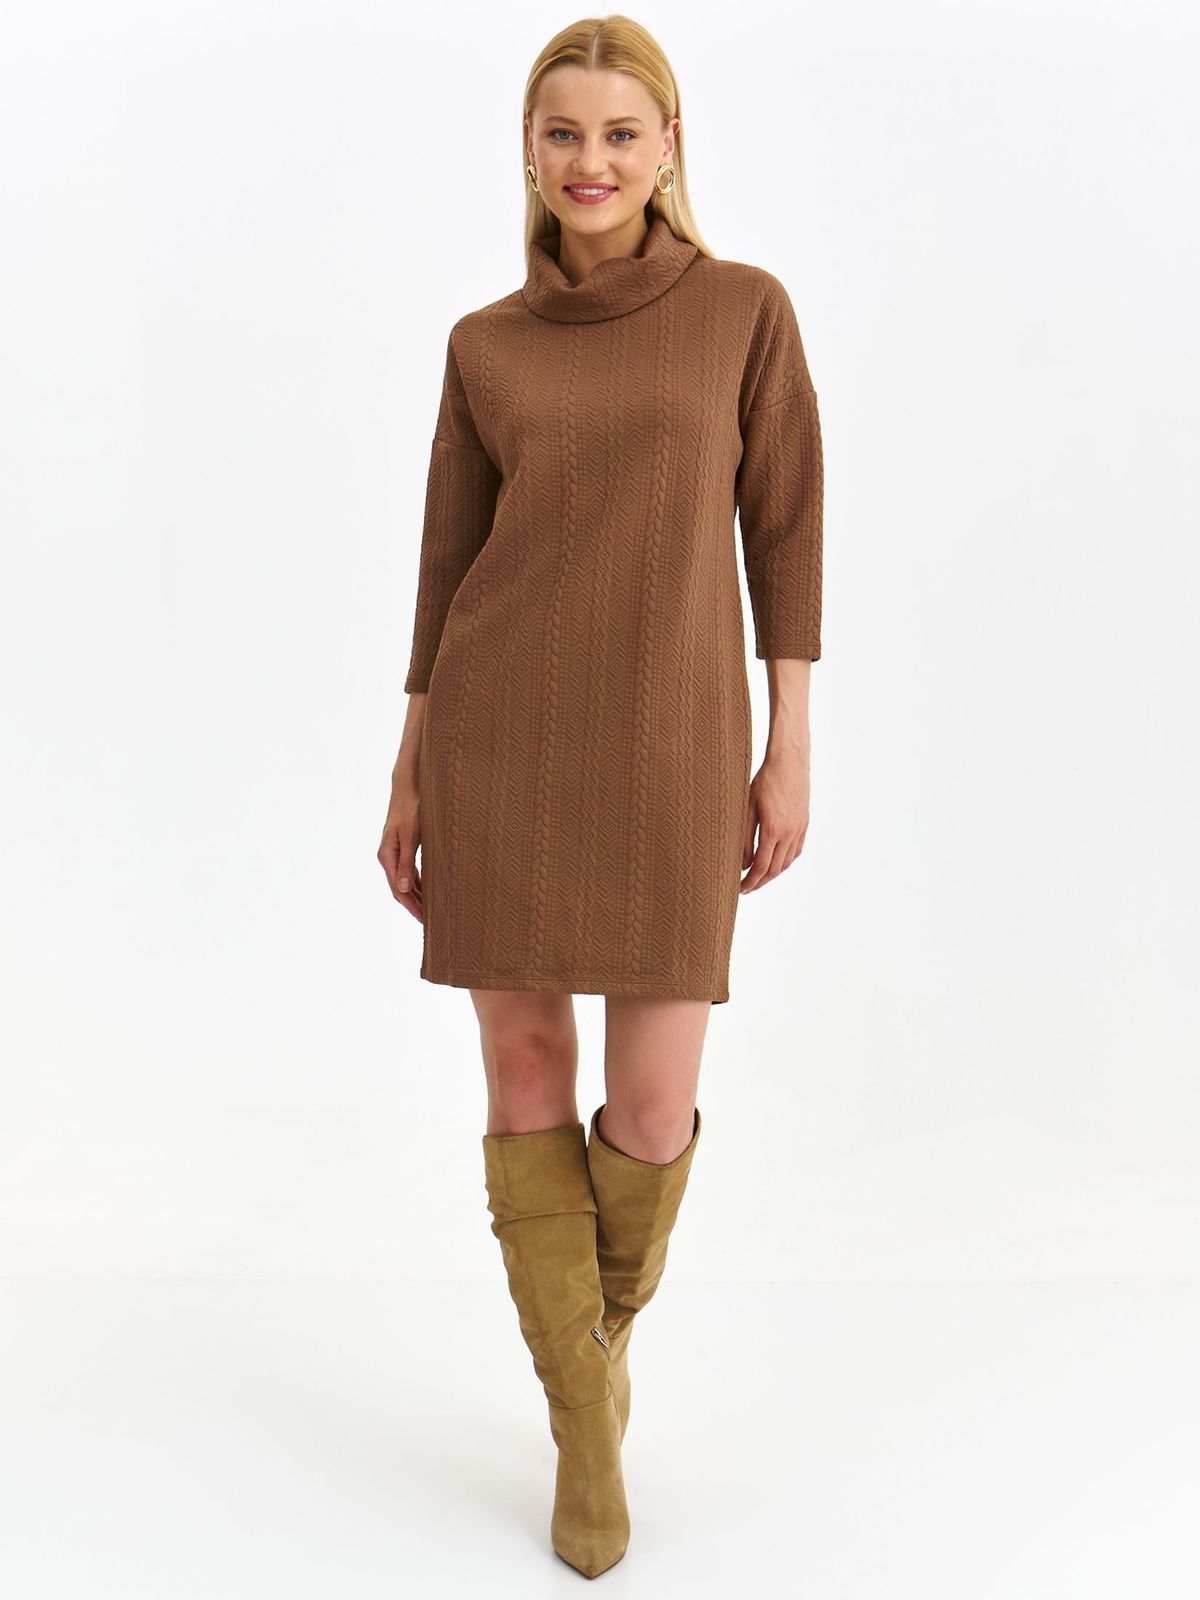 Brown dress knitted straight high collar